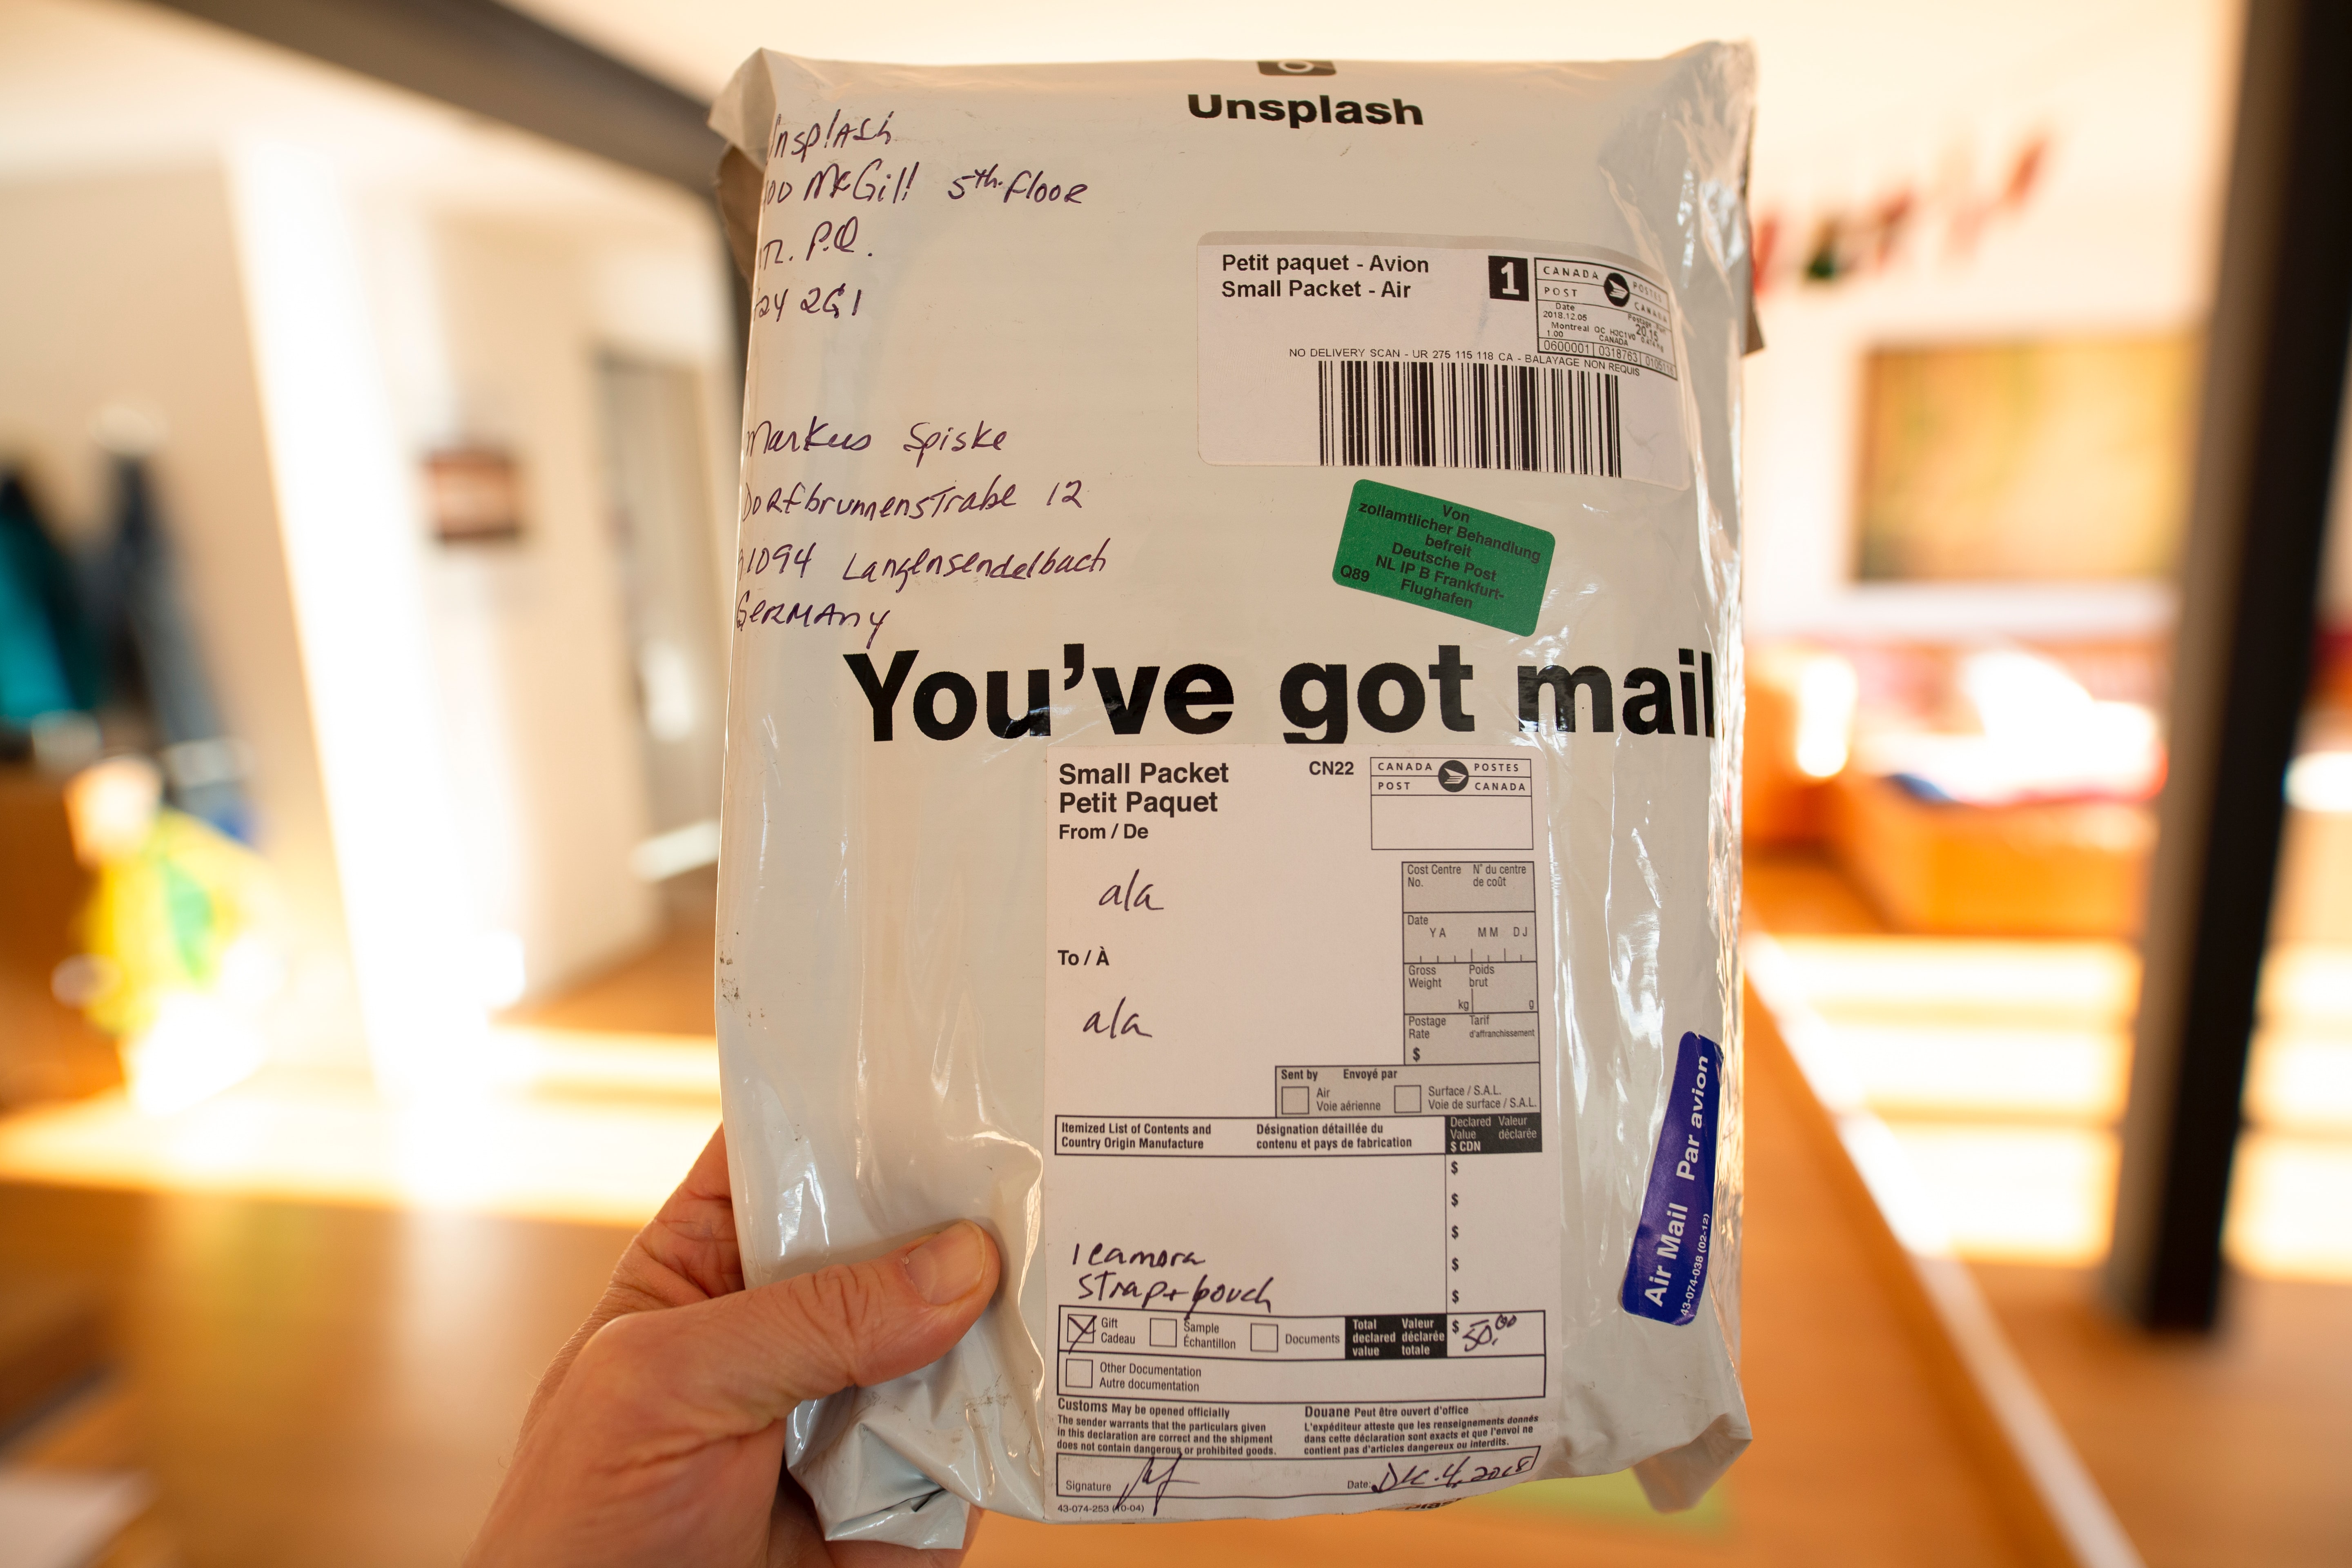 A parcel that has reached the hands of the final recipient: with a clearly visible shipping label.